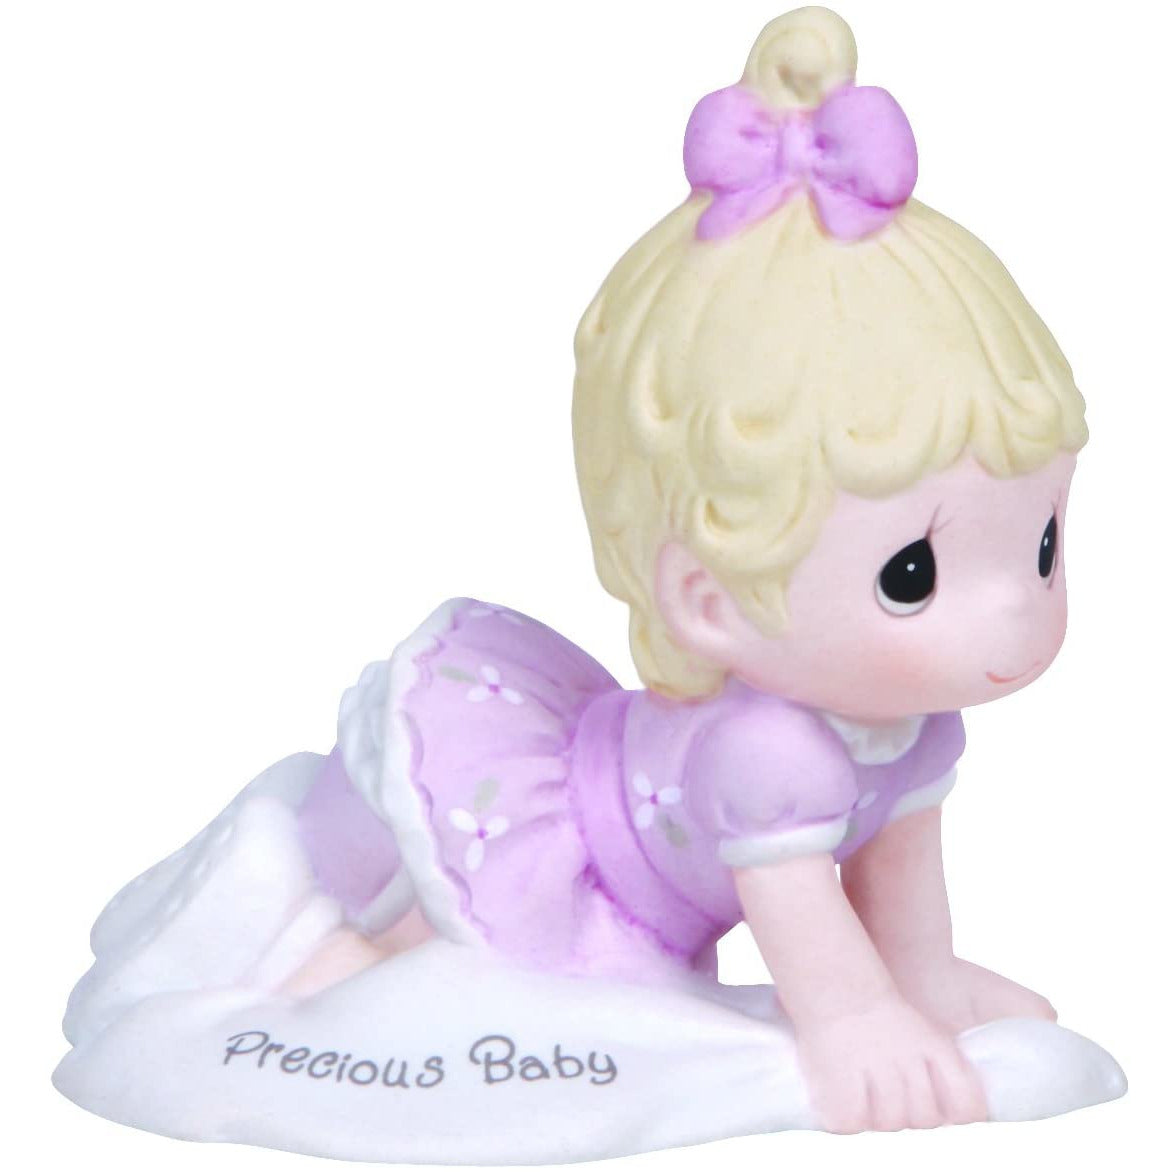 Growing In Grace, Precious Baby, Bisque Porcelain Figurine